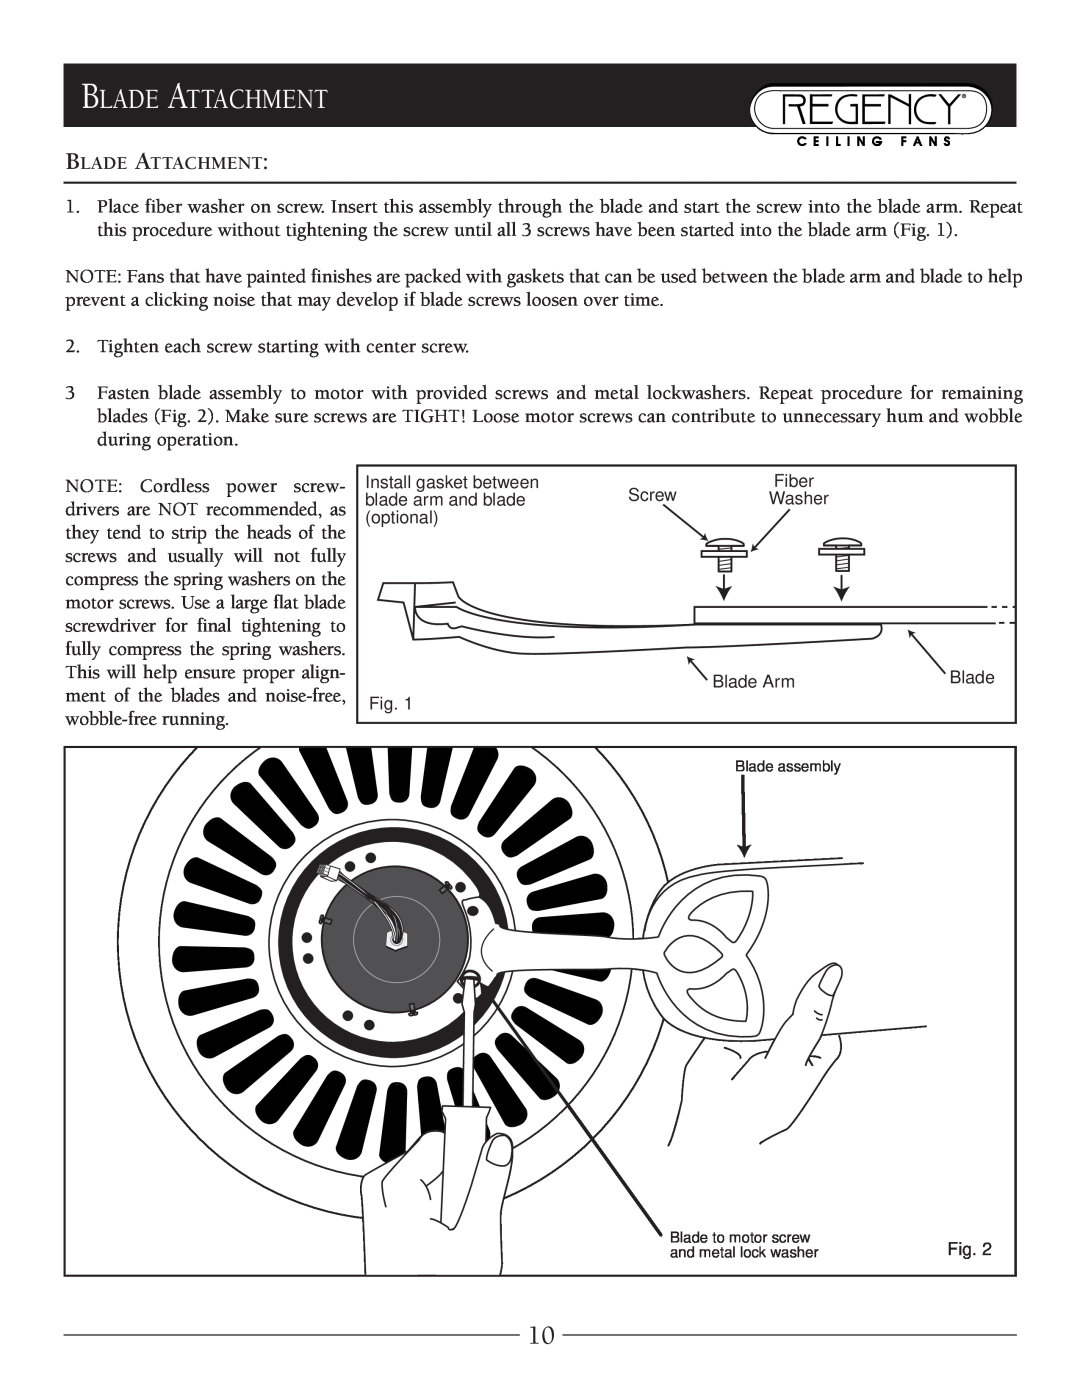 Marquis SERIES owner manual Blade Attachment 